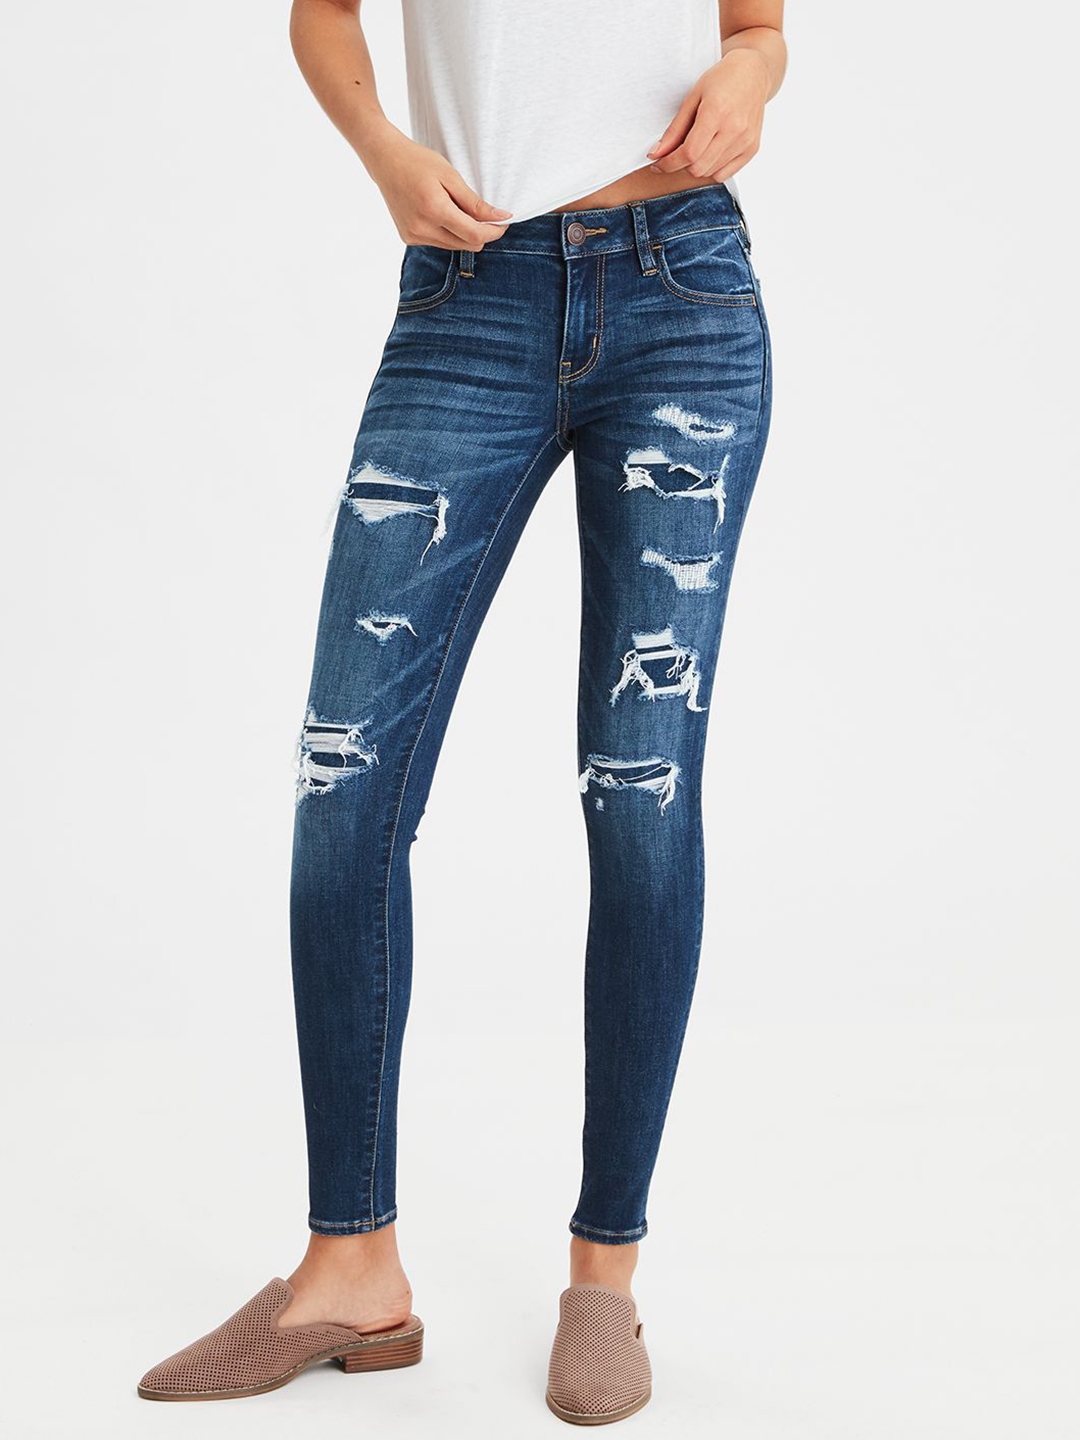 low rise jeggings american eagle